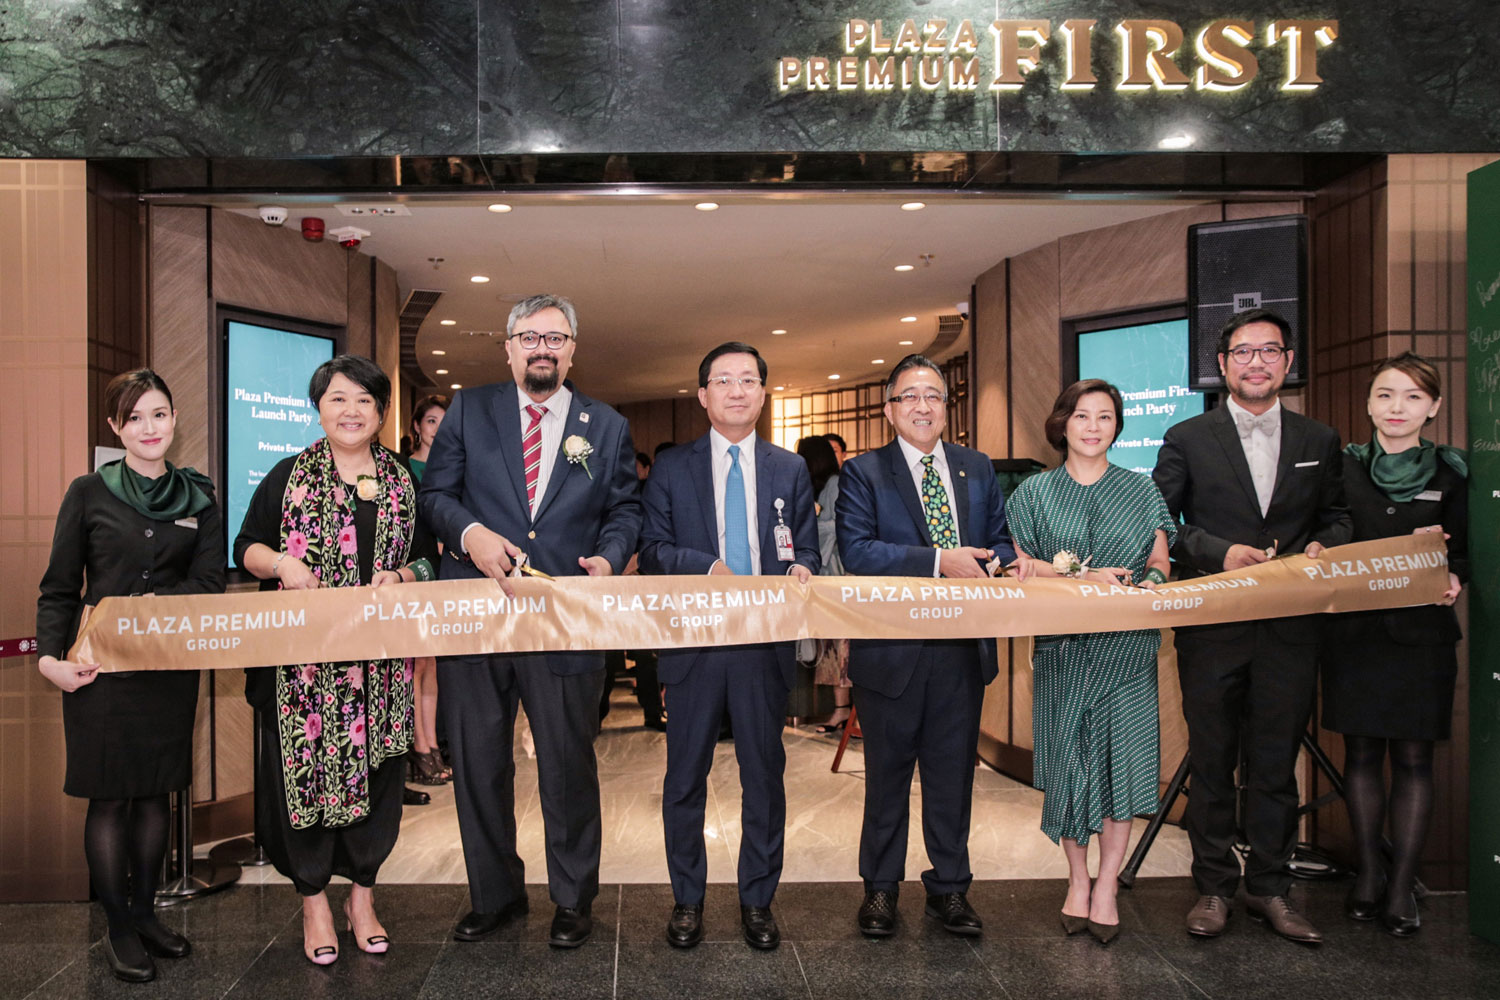 Mr. Song Hoi-see (middle), Founder and Chief Executive Officer of Plaza Premium Group and officiating guests officially opening Plaza Premium First Hong Kong at Ribbon Cutting Ceremony.